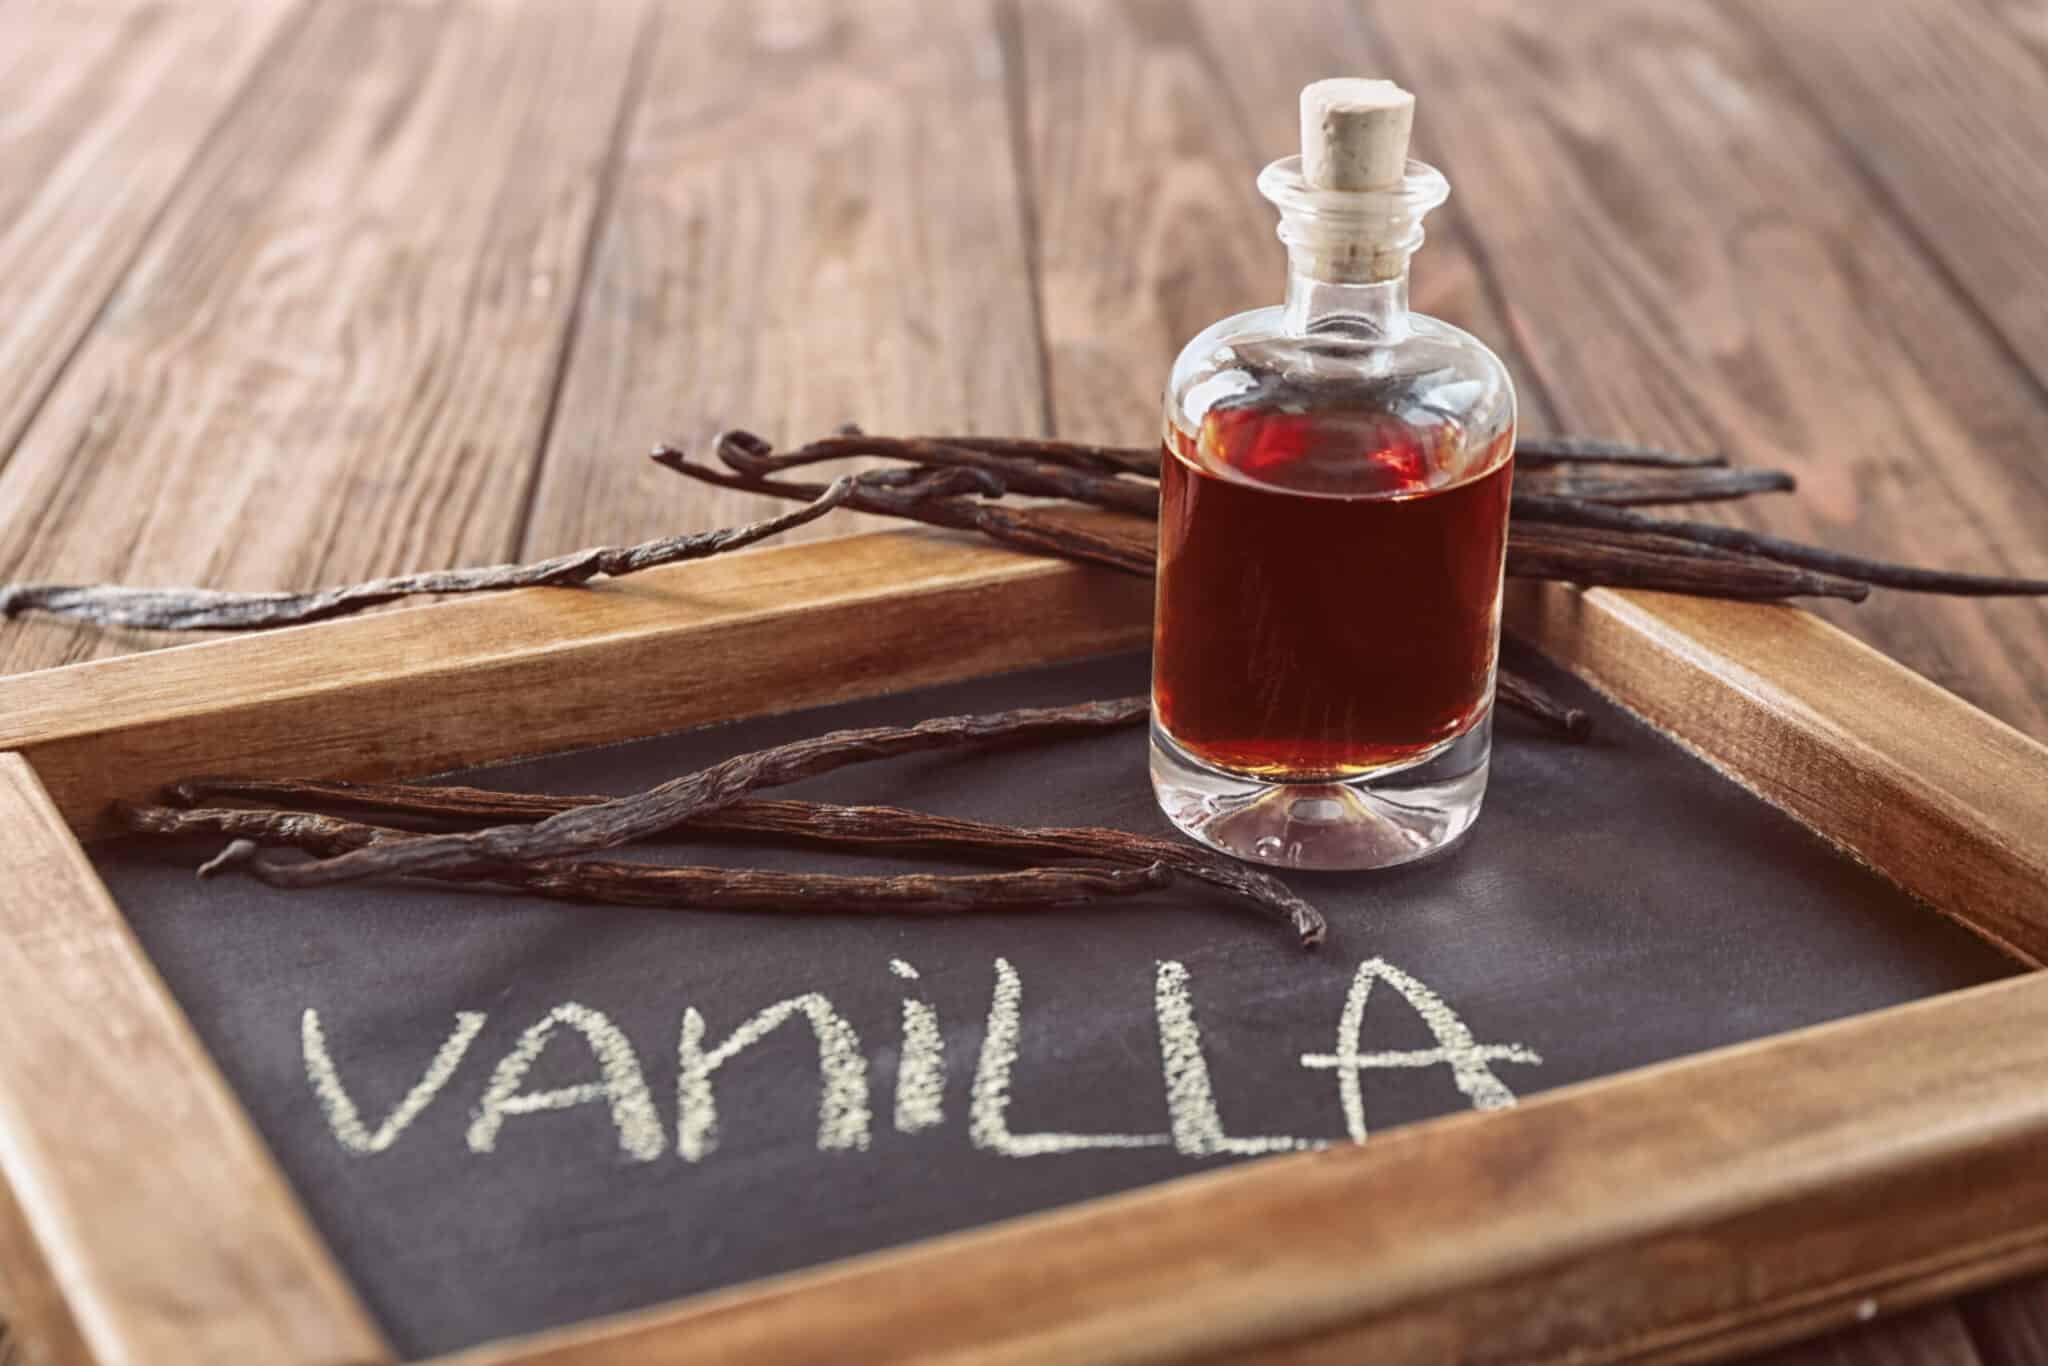 What Can I Use to Substitute Vanilla Extract